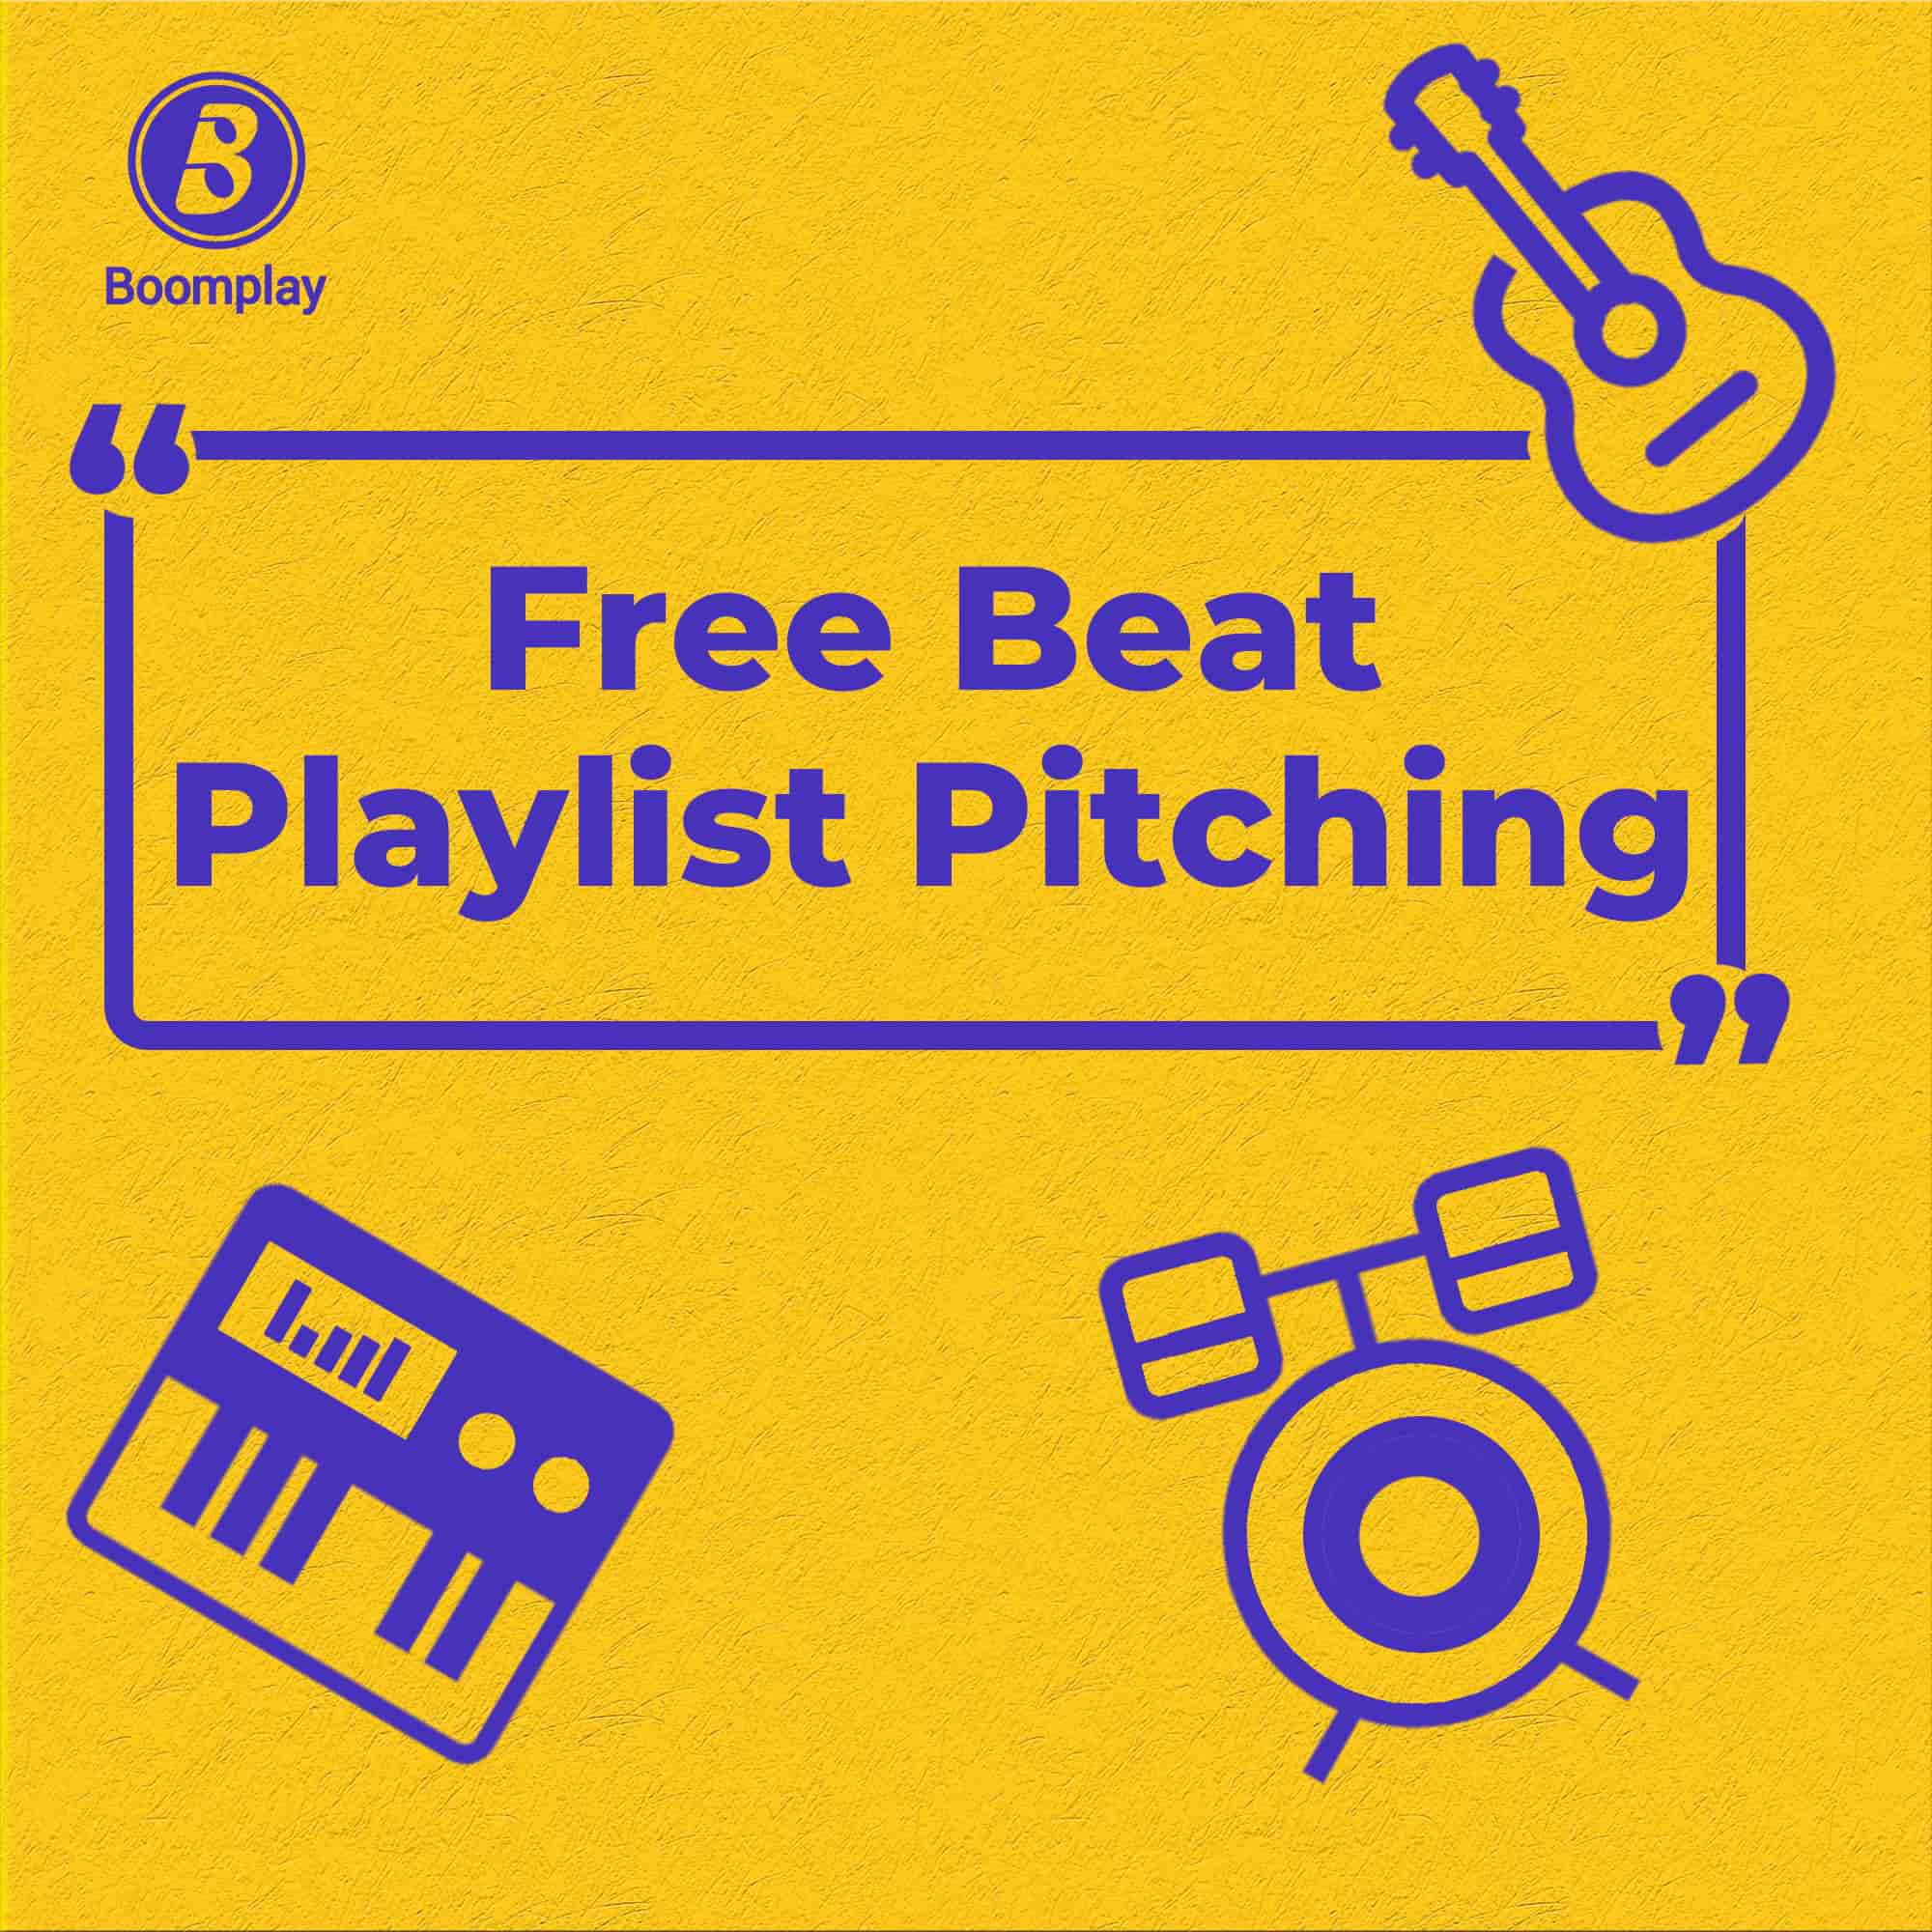 Upload Your Free Beat To Boomplay&Get Promoted